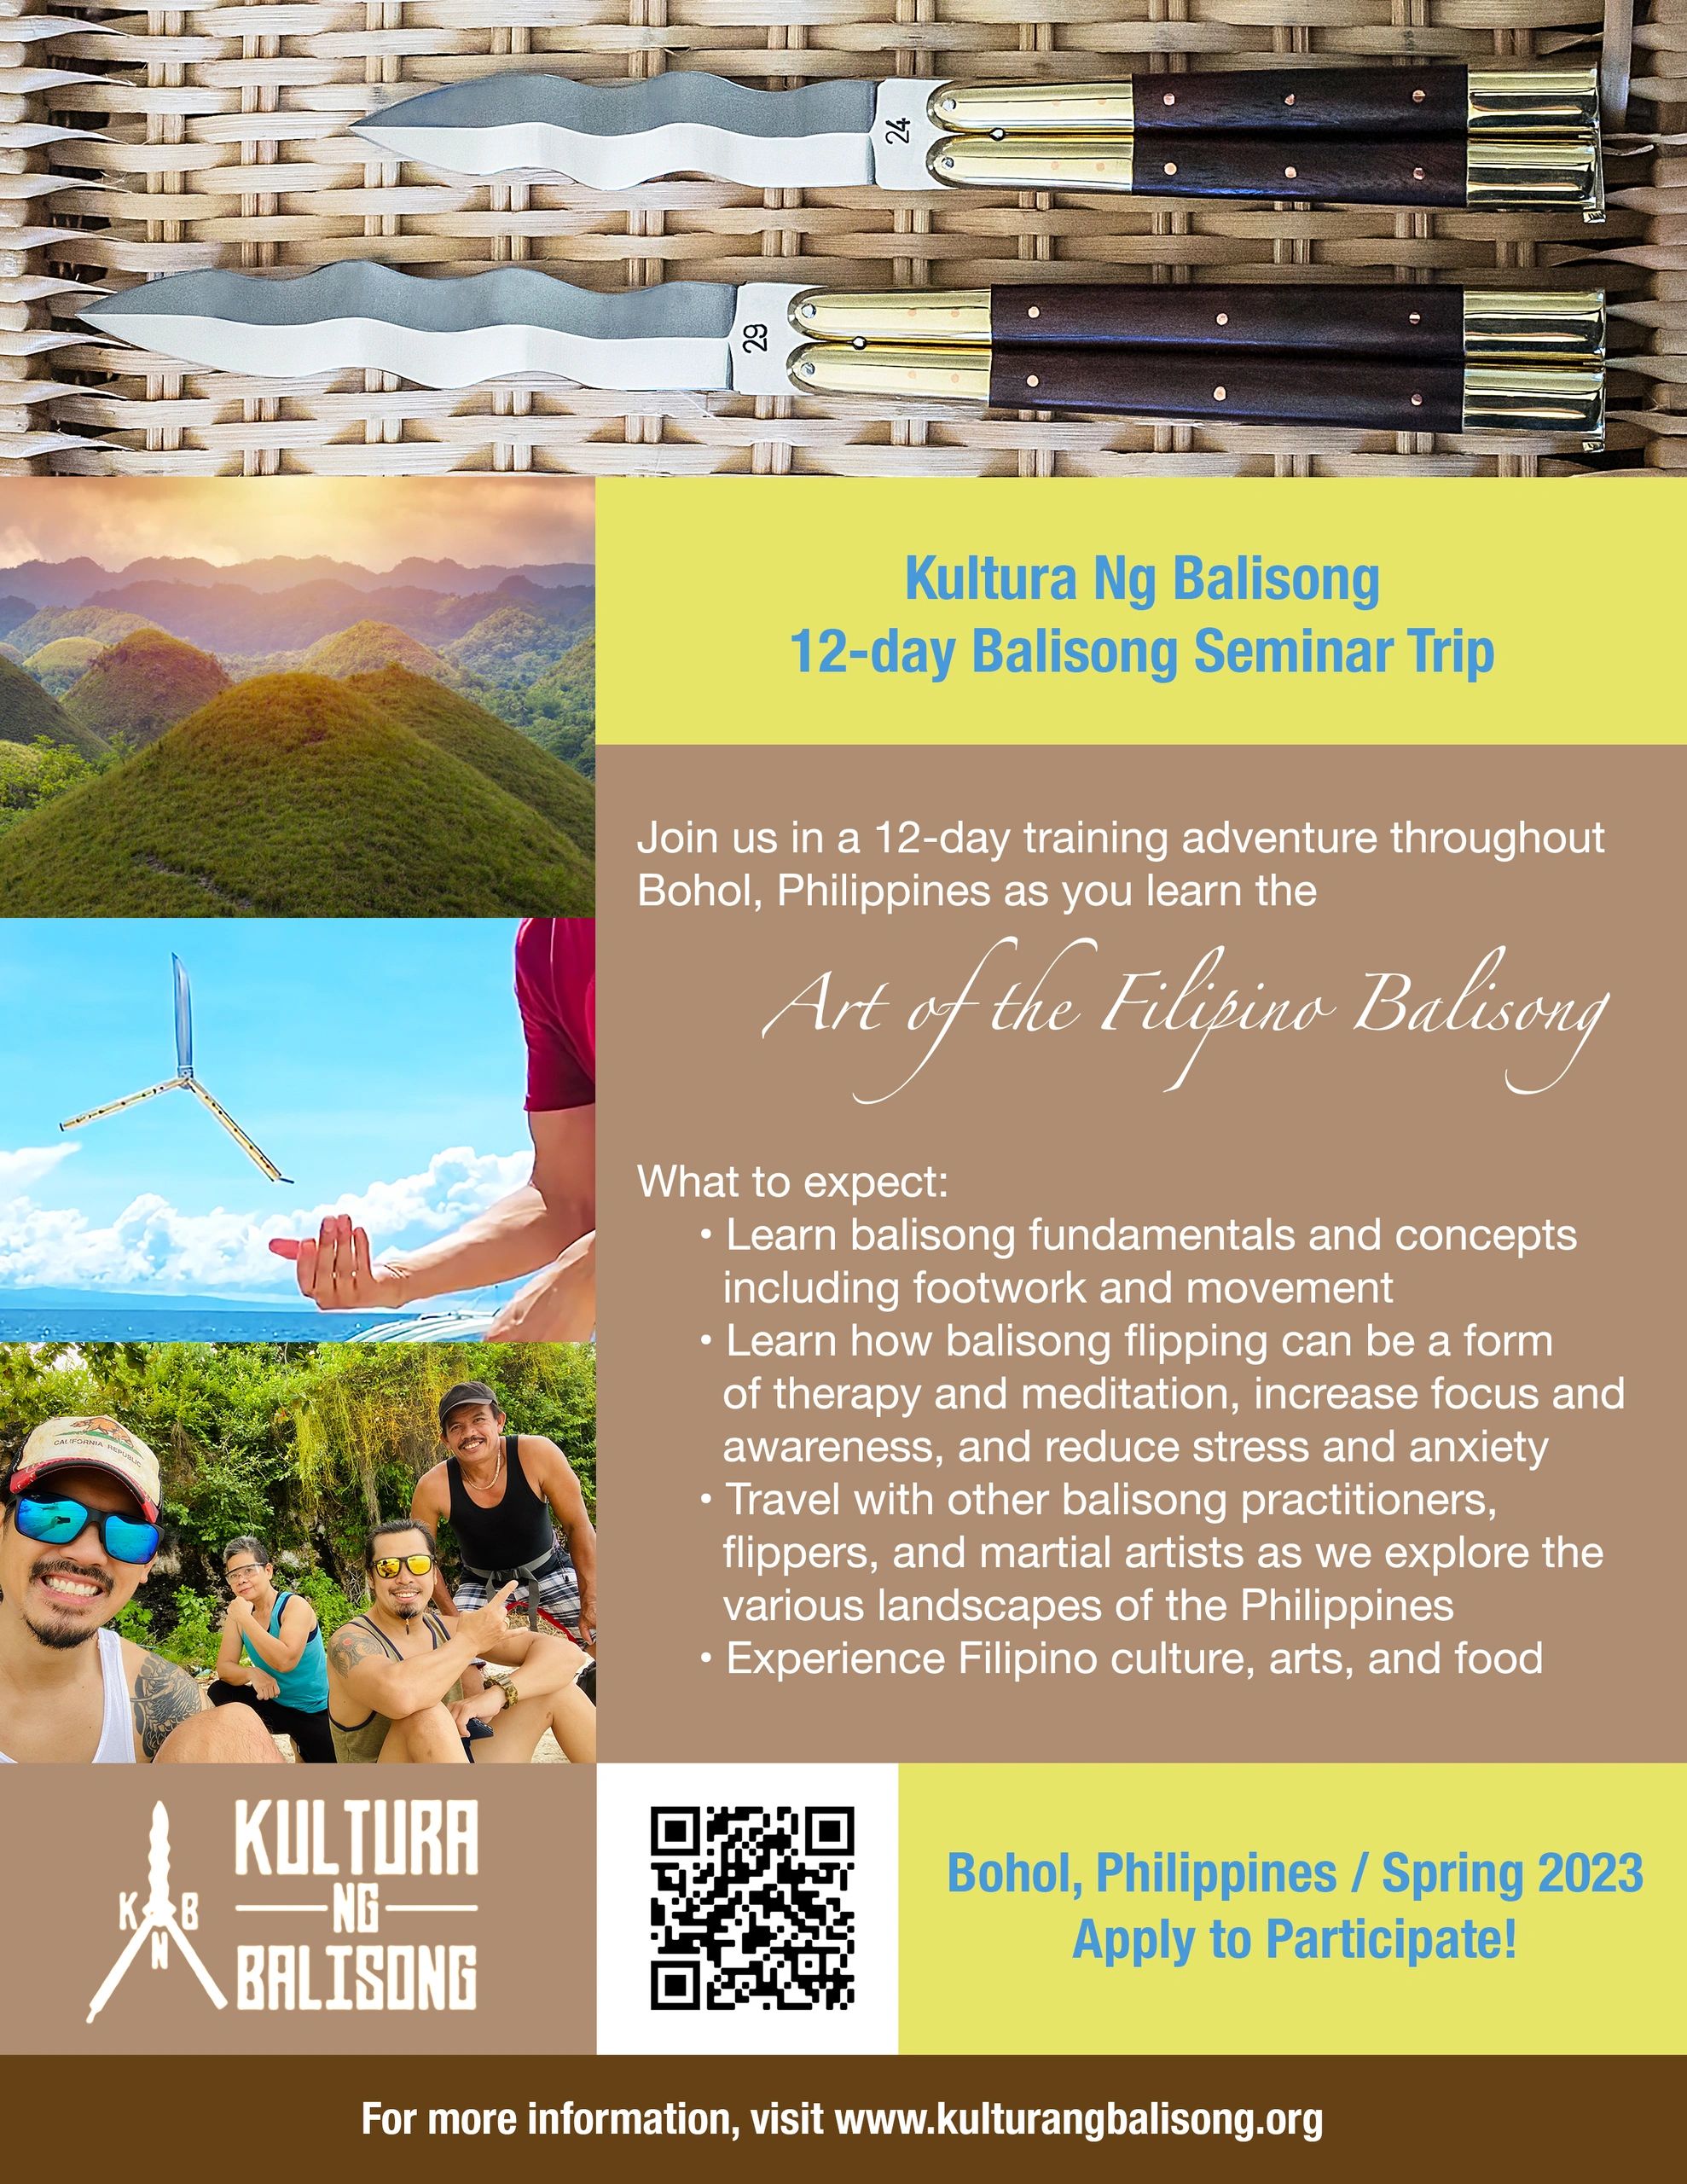 An informative flyer about Kultura Ng Balisong event